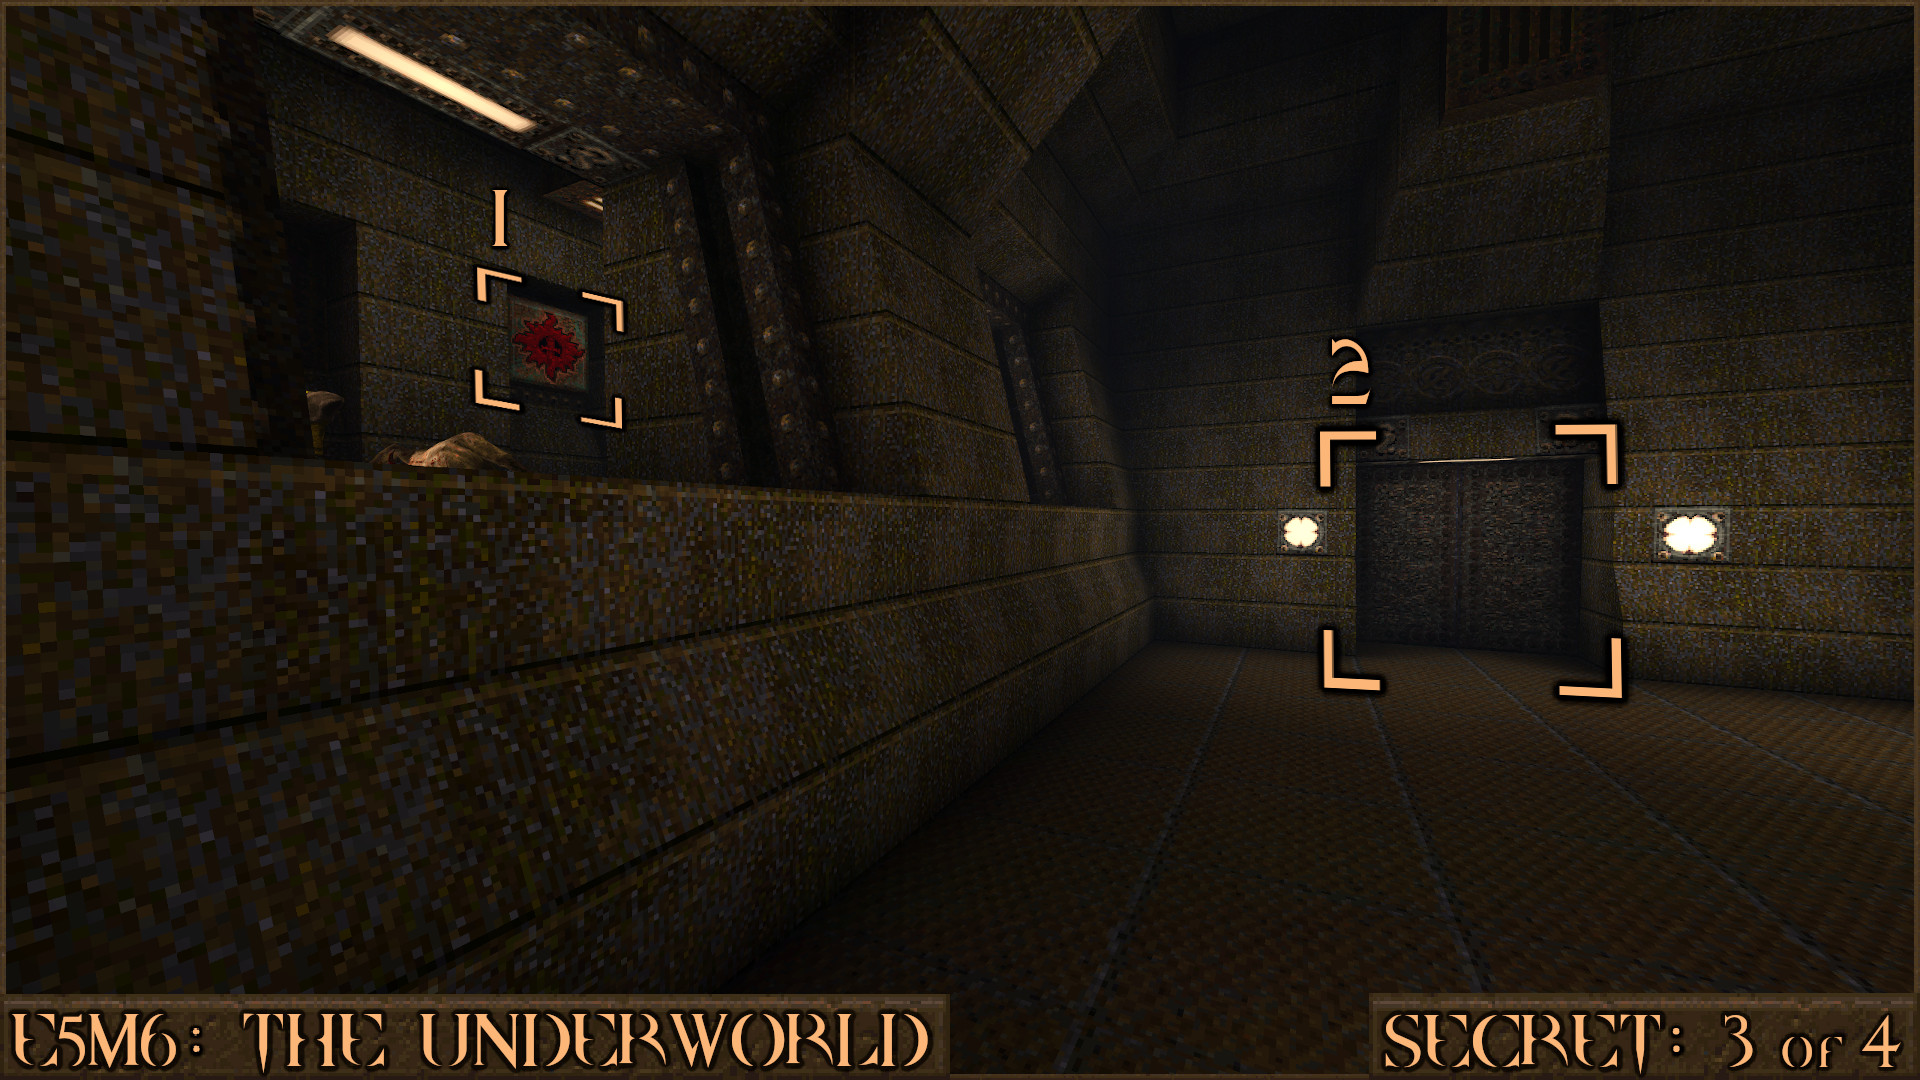 Quake Finding All Secrets in Quake Expansion pack: Dimension of the Past - E5M6: The Underworld - 3413A34